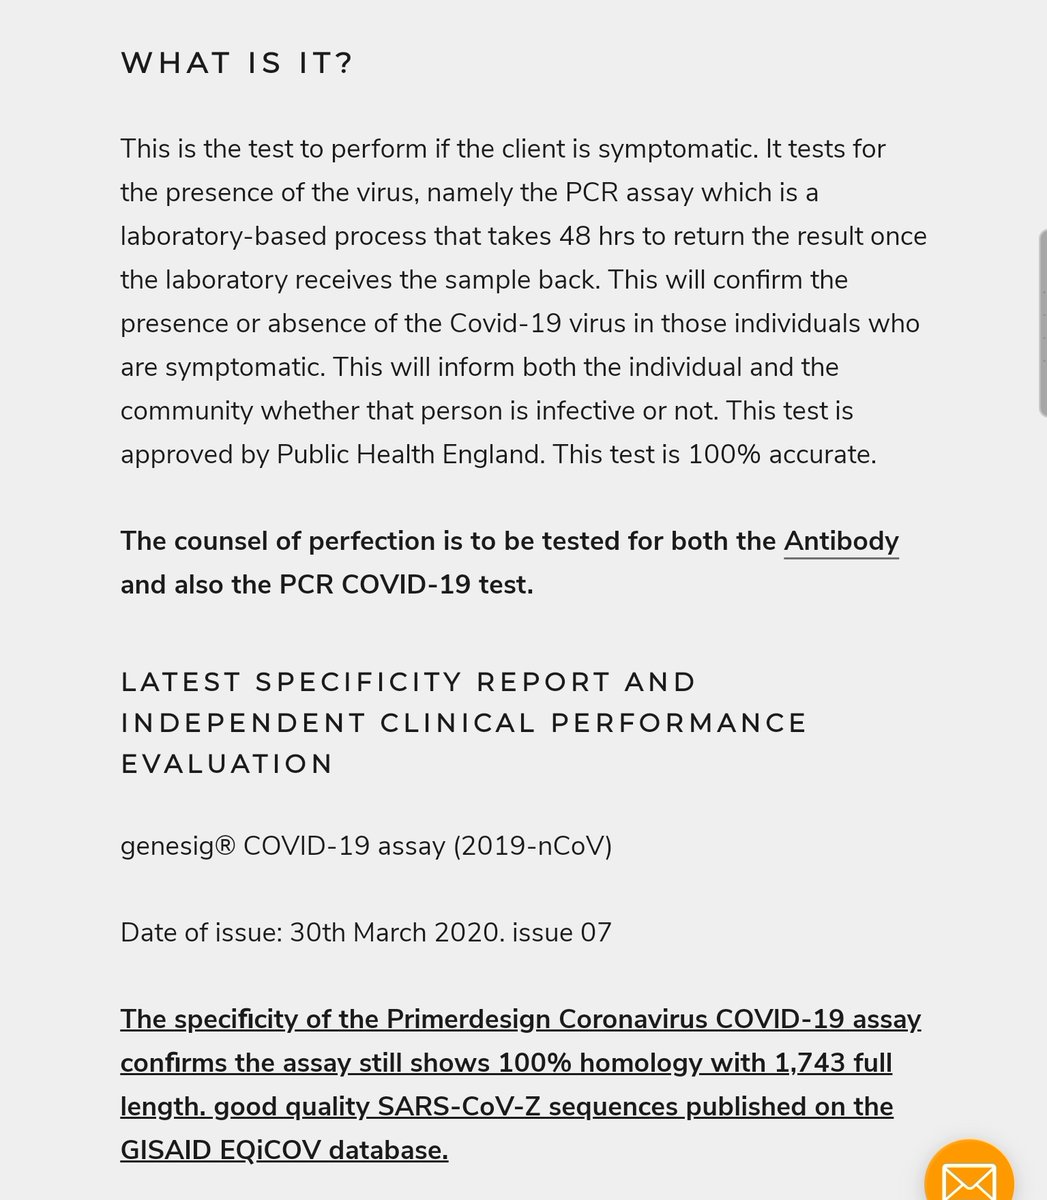 I have found 2 examples of tests available to order online, privately, not via the NHS. This one claims to be 100% accurate, is PCR and is £400 including delivery. That’s a lot of money!  https://privateharleystreetclinic.com/products/covid-19-test 11/n